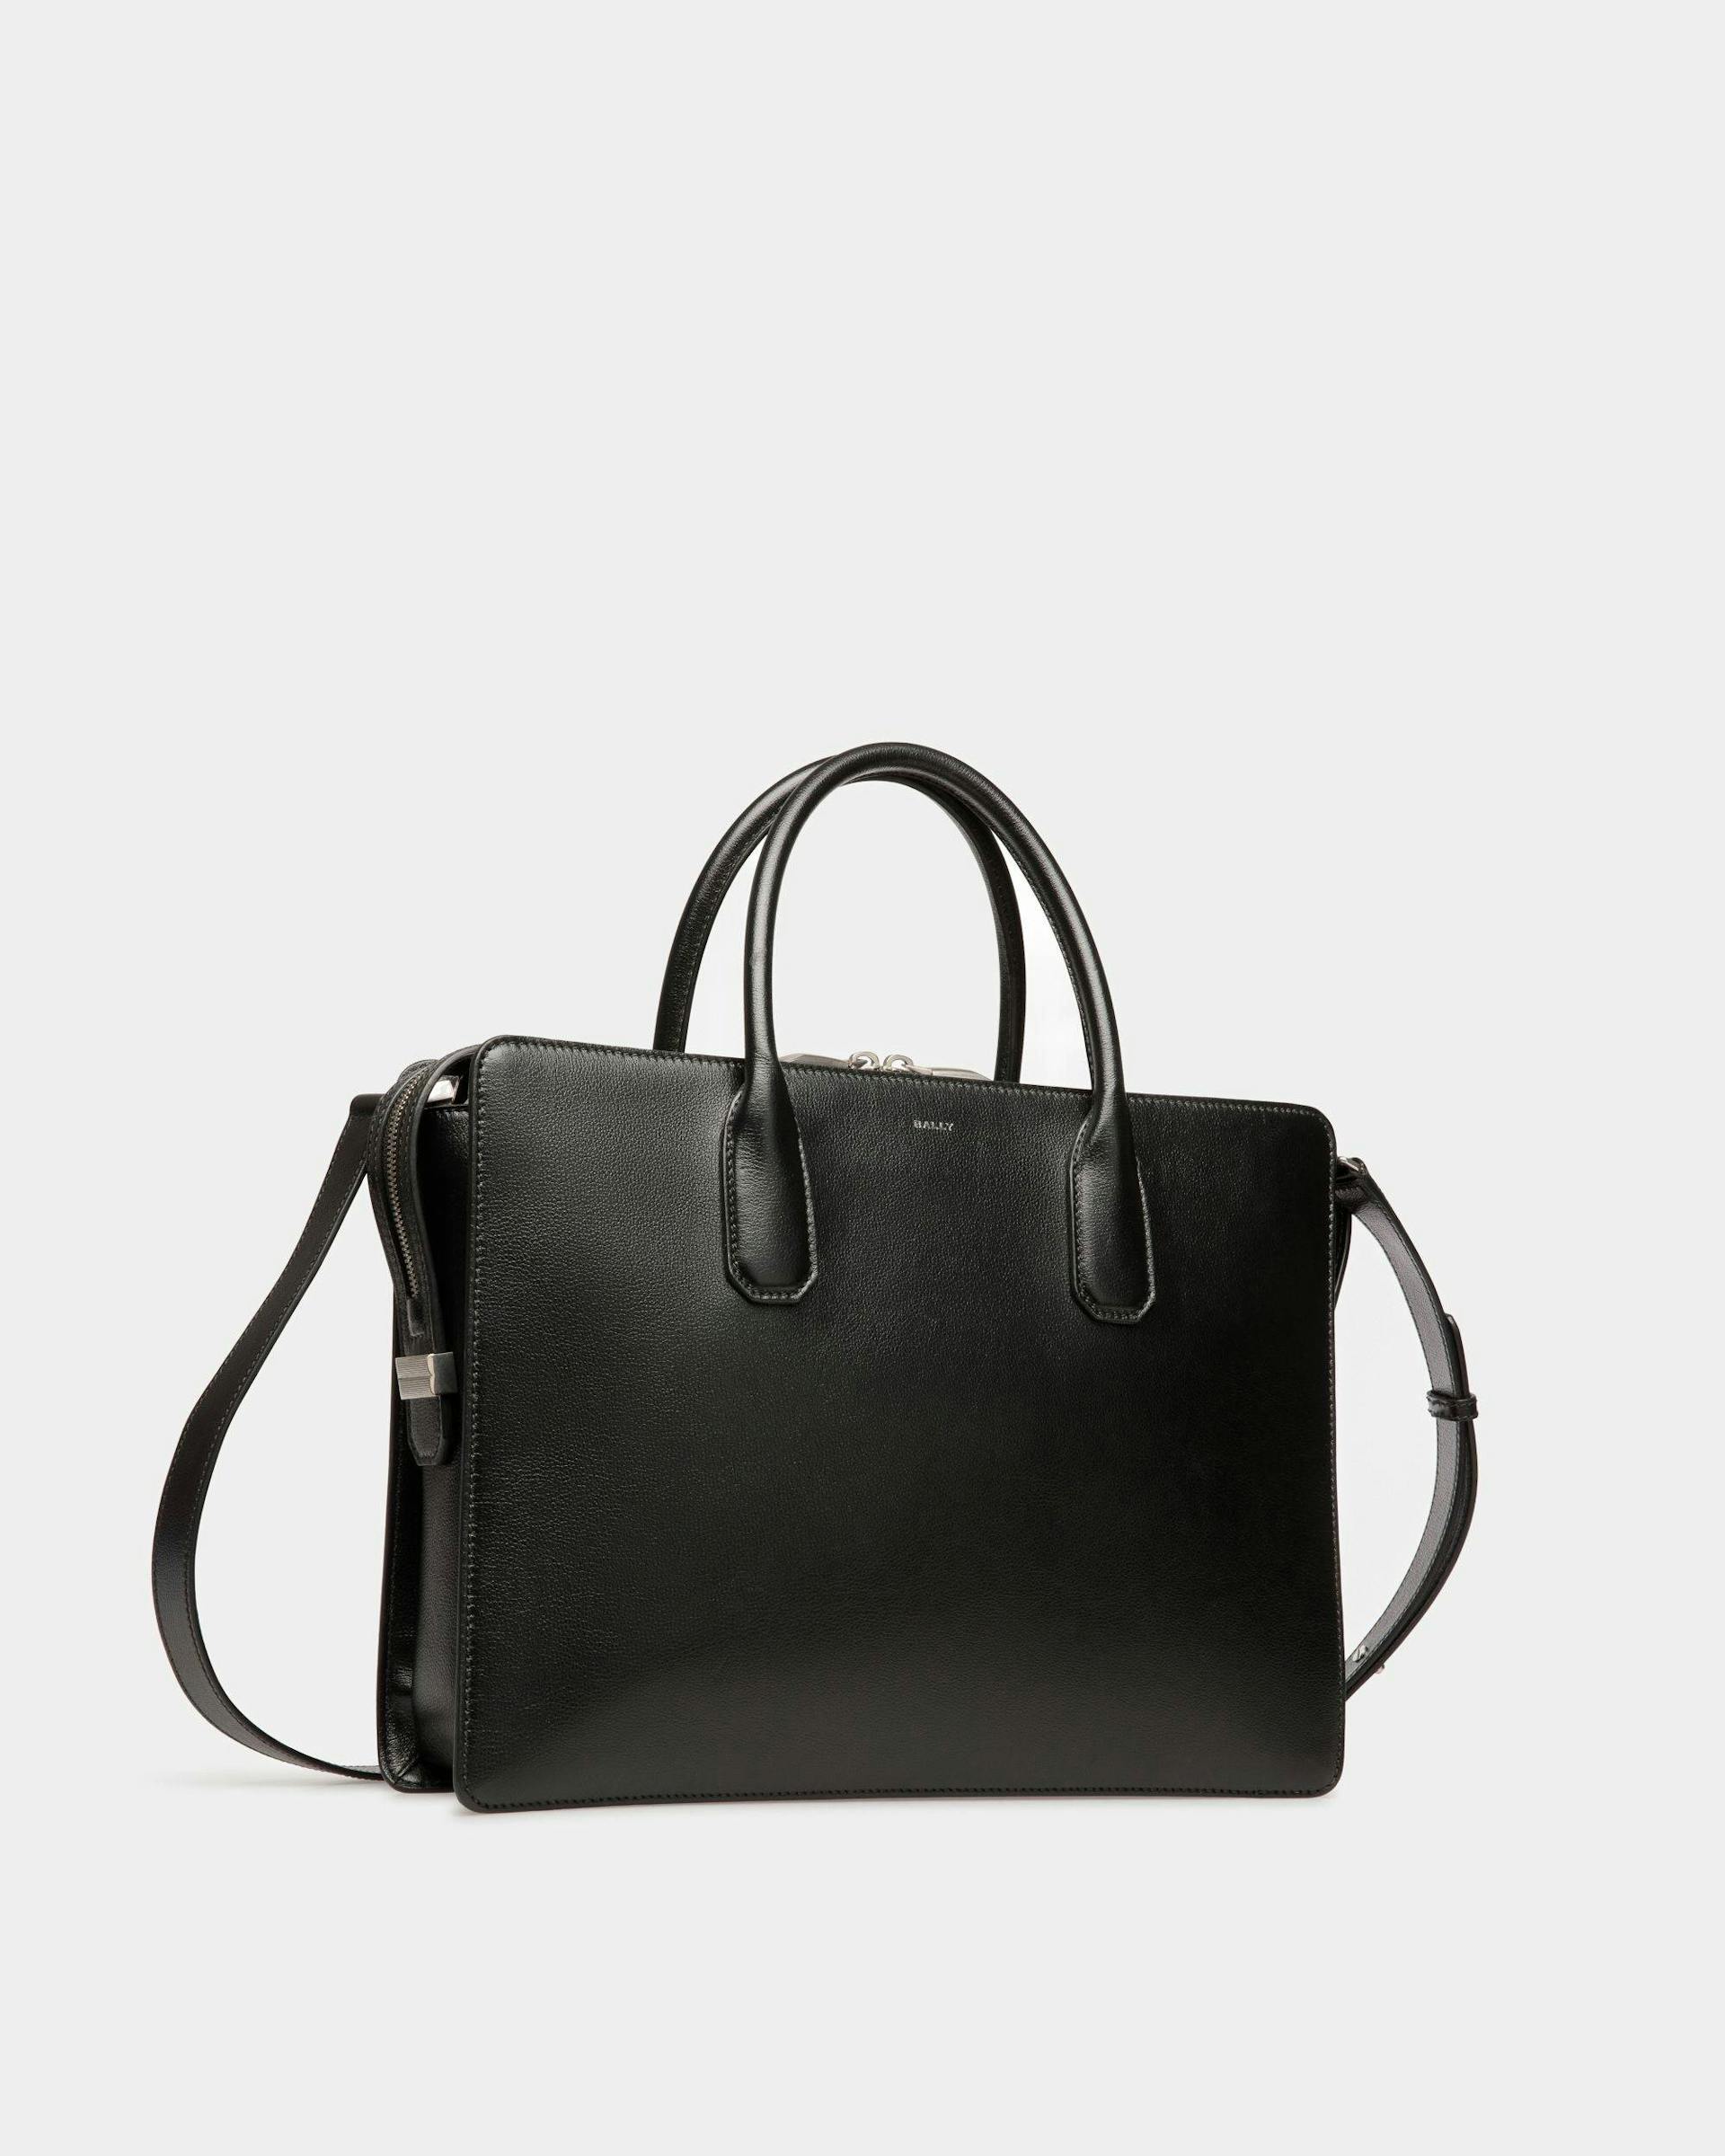 Men's Banque Business Bag In Black Leather | Bally | Still Life 3/4 Front